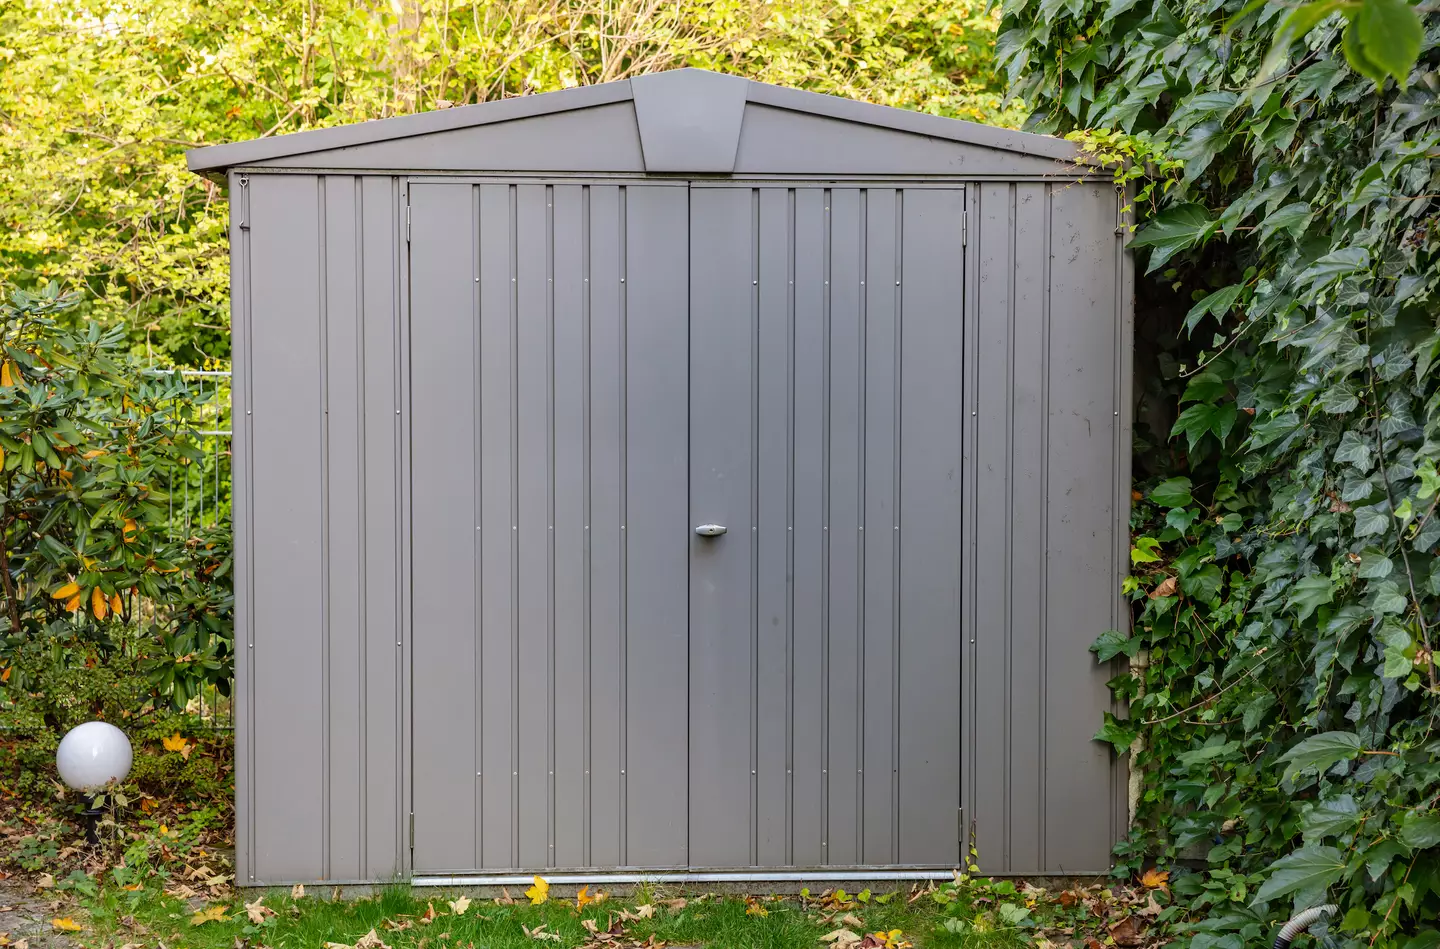 The toddler was accidentally locked inside a metal shed.